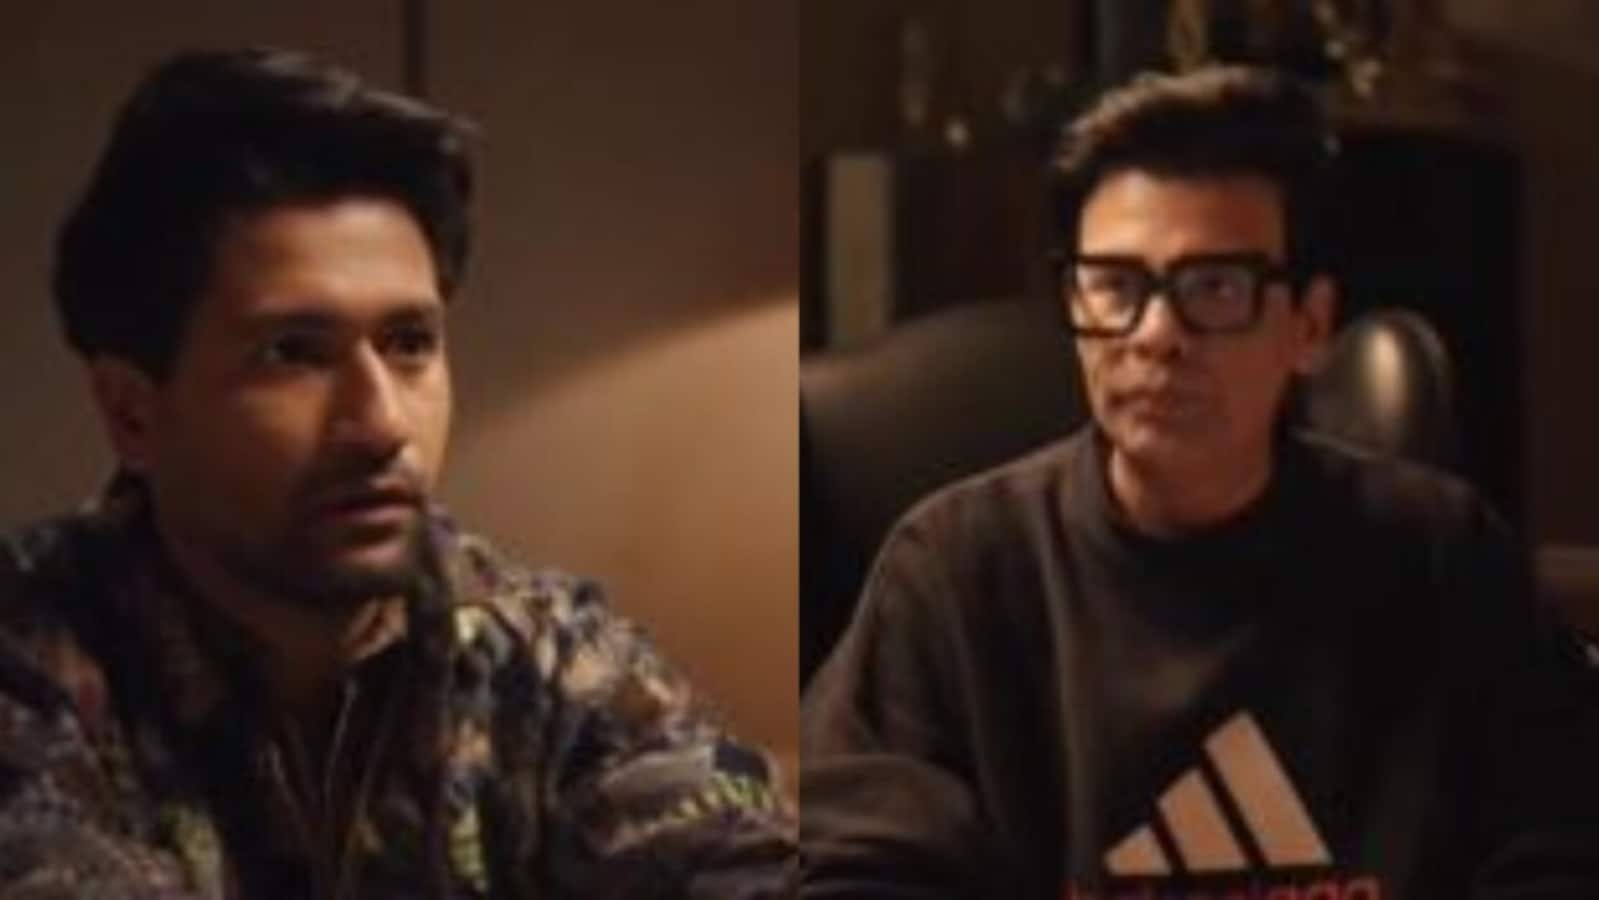 Vicky Kaushal can’t hide his disappointment as Karan Johar offers him SOTY 3. Watch hilarious video